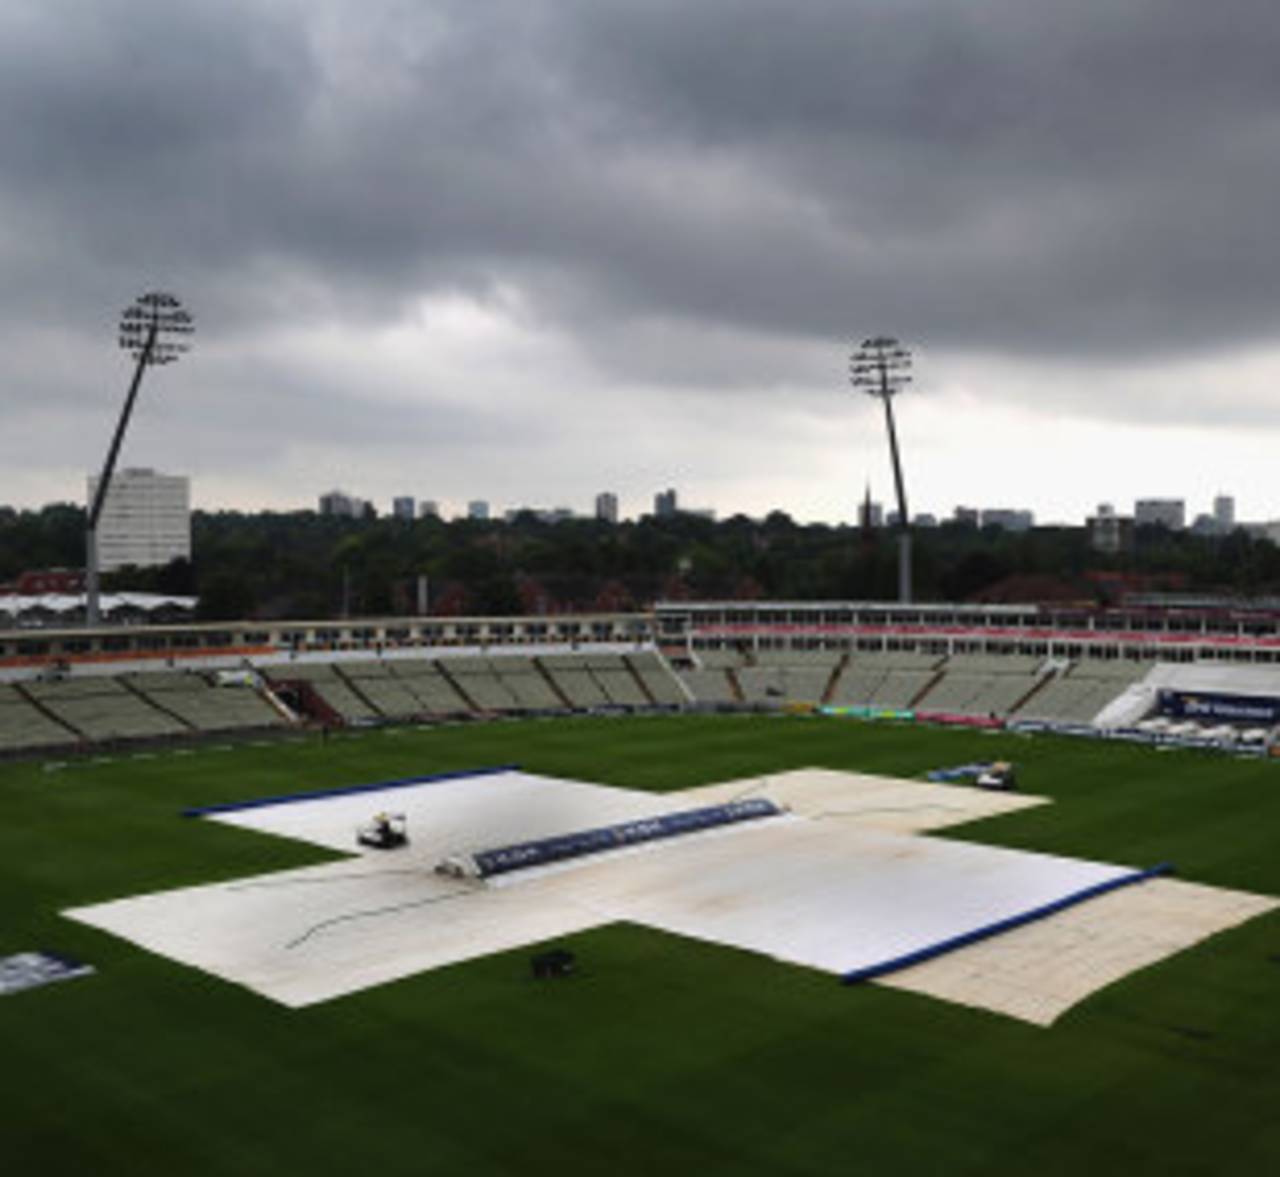 The covers at Edgbaston were a familiar sight during the rain-soaked West Indies Test&nbsp;&nbsp;&bull;&nbsp;&nbsp;Getty Images